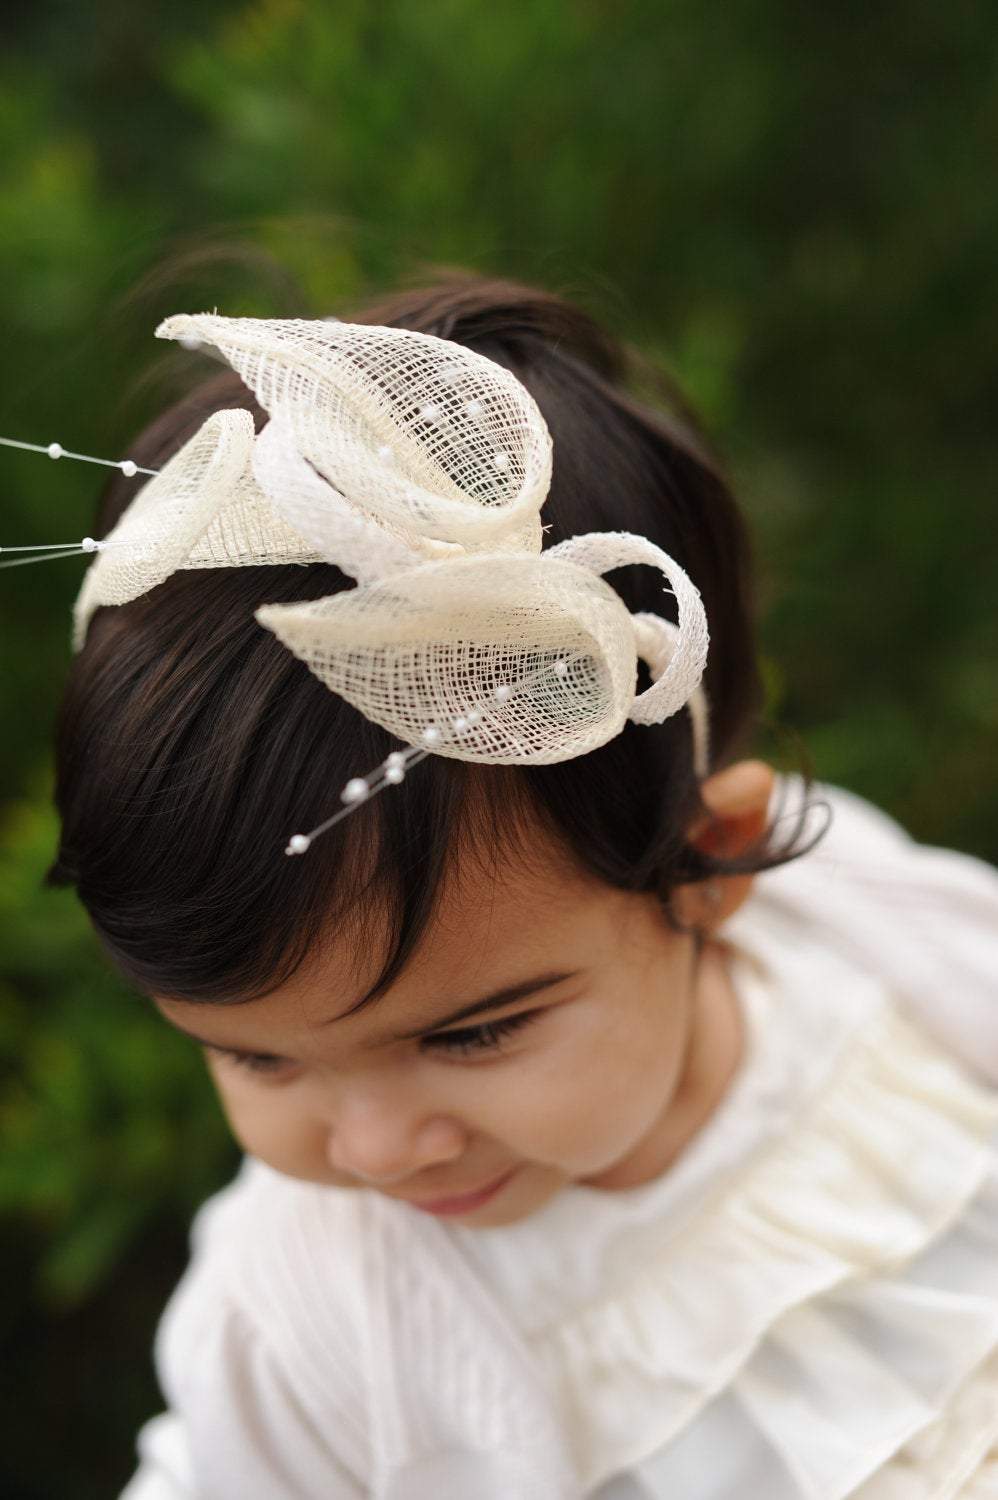 Women , girls Ivory Bridal, Bridesmaids, Wedding or any other special occasion headband - Fascinator, hair accessory